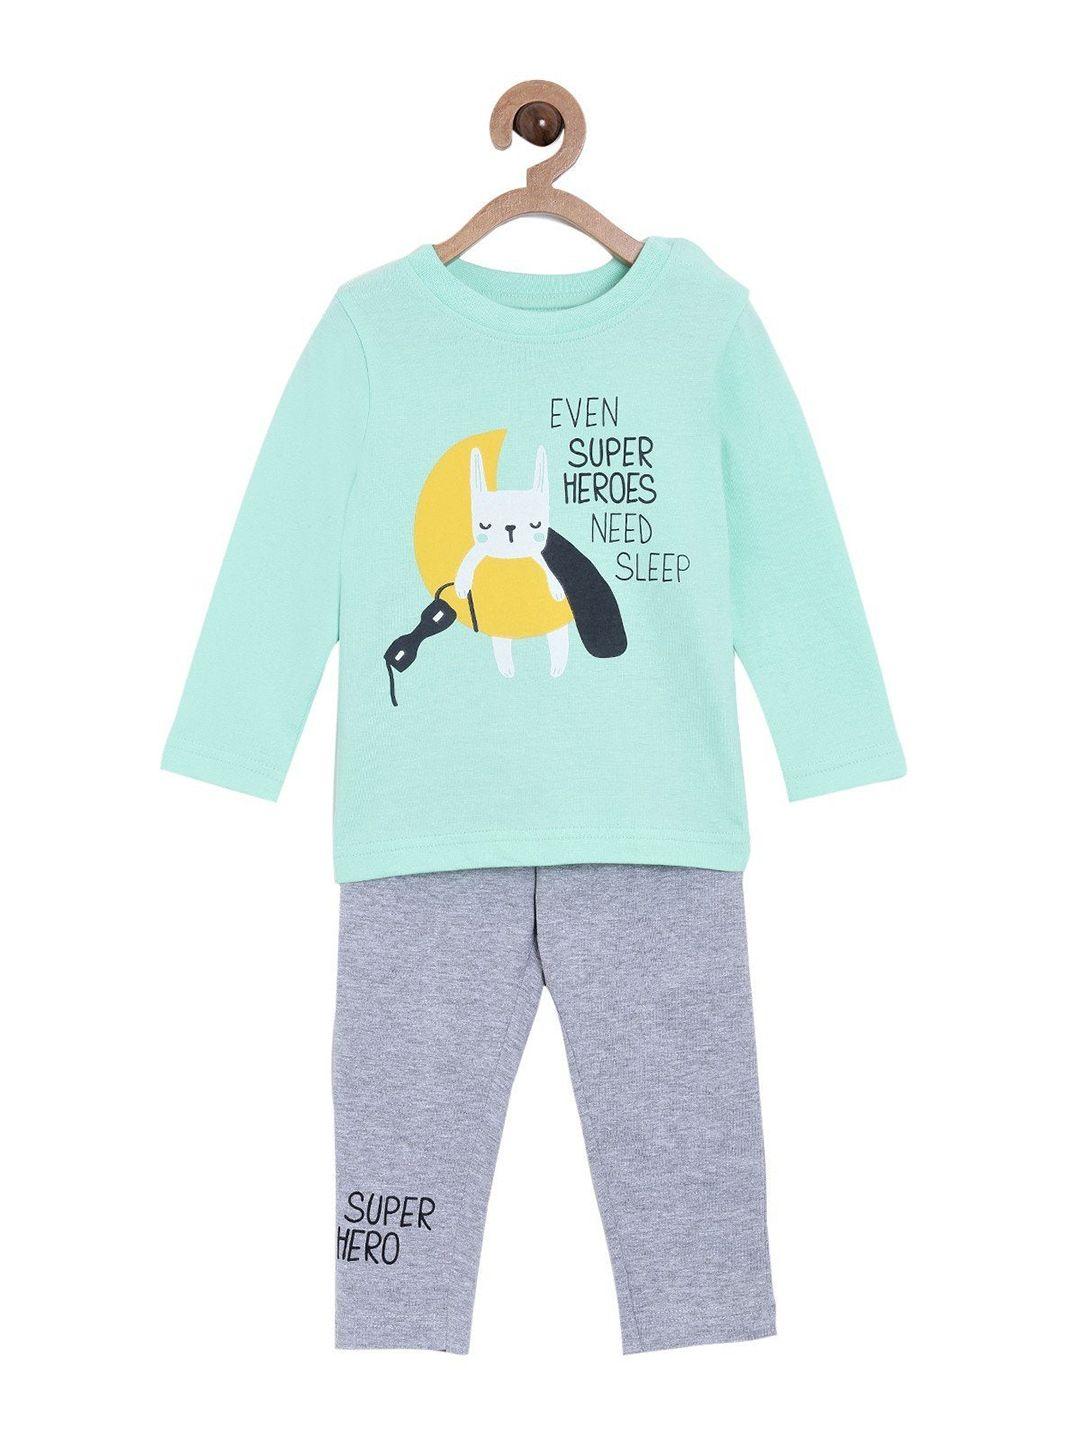 the mom store unisex kids green & grey printed night suit